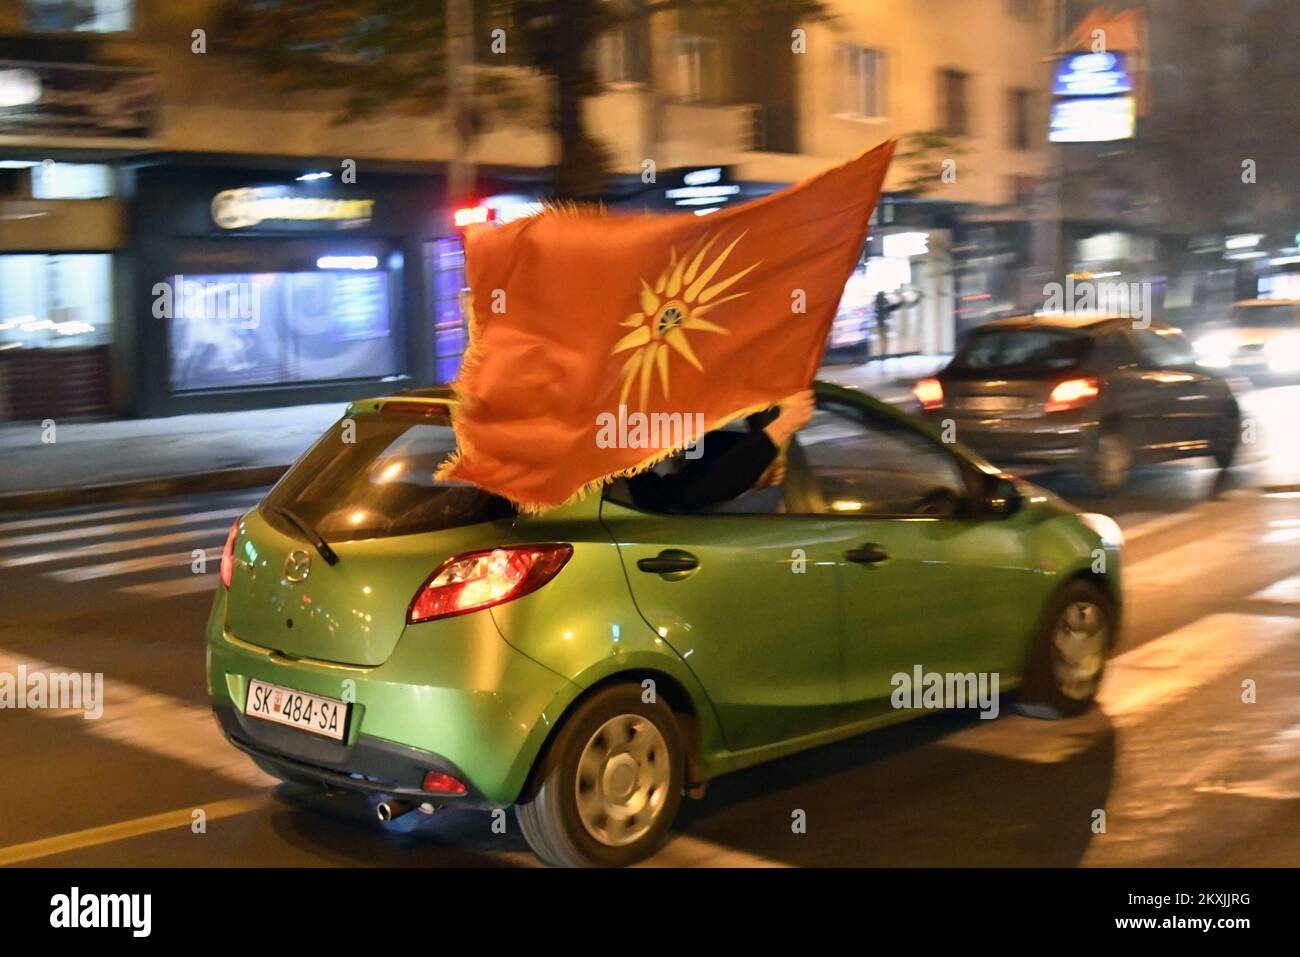 Football fans celebrate on the city streets , in Skoplje, North Macedonia , on November 12,2020.North Macedonia will go to a major tournament for the first time in their history after a Goran Pandev goal gave the Balkan nation a 1-0 win away to Georgia in their Euro 2021 qualifying play-off final on Thursday.Pandev scored the only goal of the game in the 56th minute in Tbilisi, allowing the country who sit 65th in FIFA's world rankings to secure their place in the finals of the postponed European Championship, which is now set to go ahead in June and July next year.They will go into Group C at Stock Photo